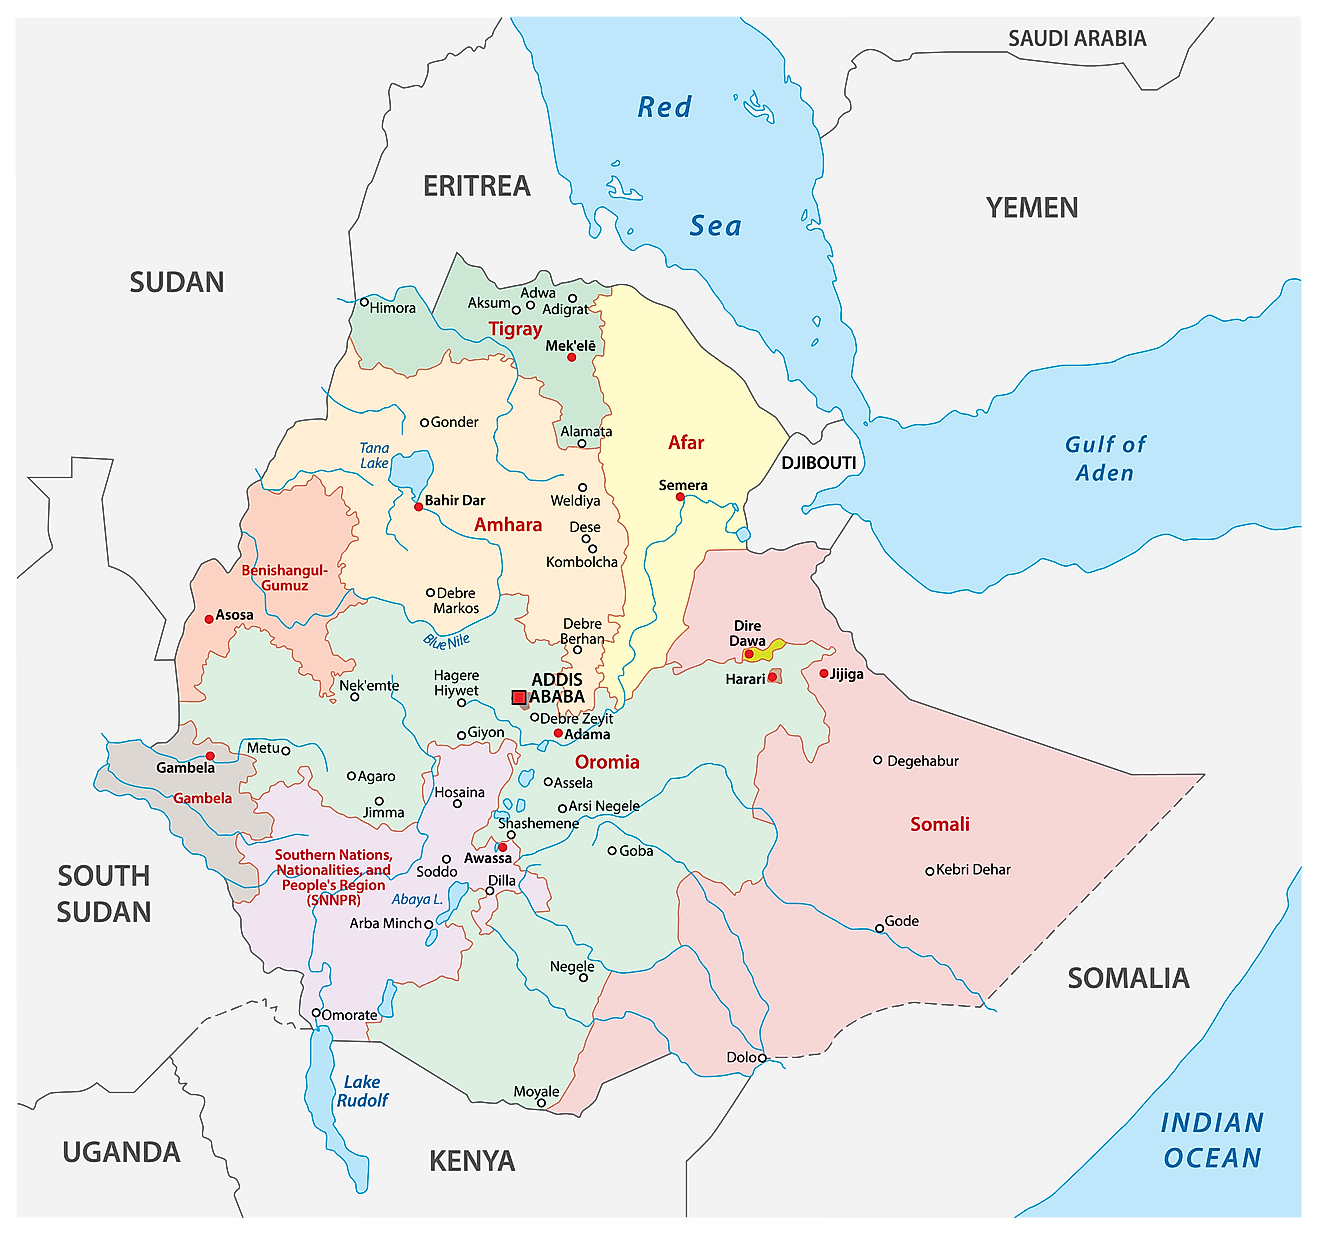 Political Map of Ethiopia showing the regions, their capitals and the capital city of Addis Ababa.